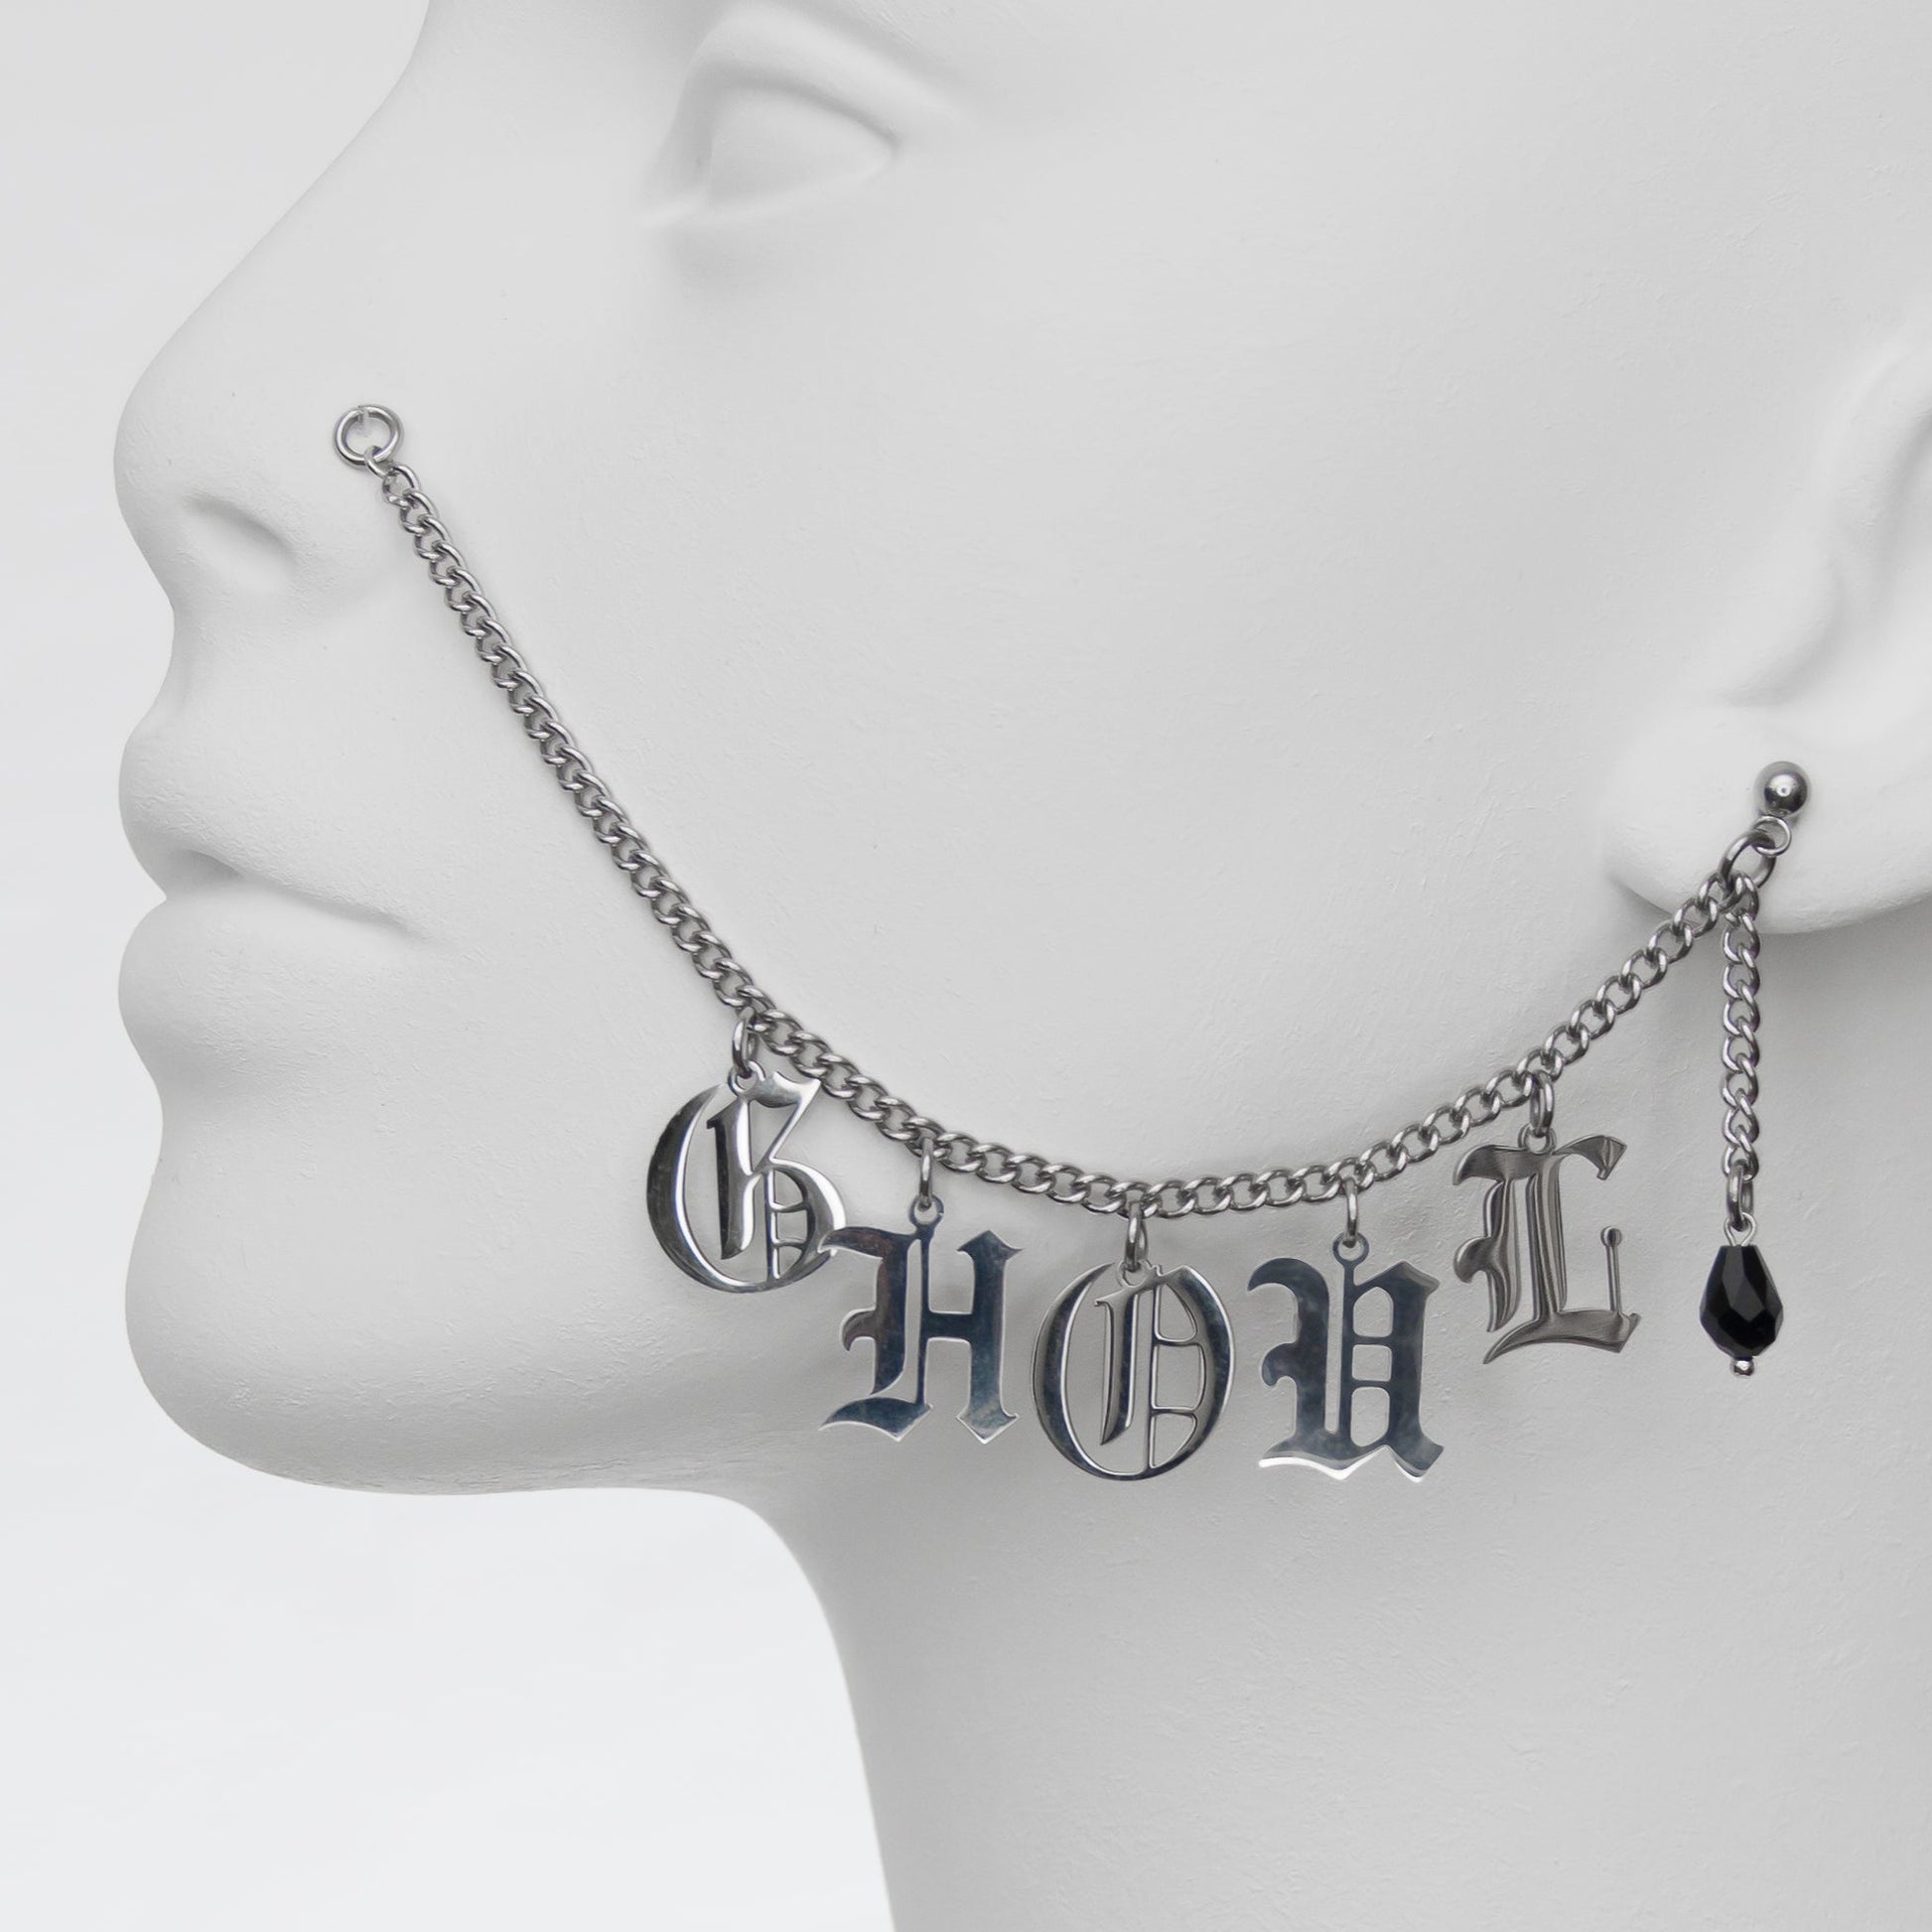 Nose to ear chain. Face jewerly with Gothic lettering and black crystal droplet earring